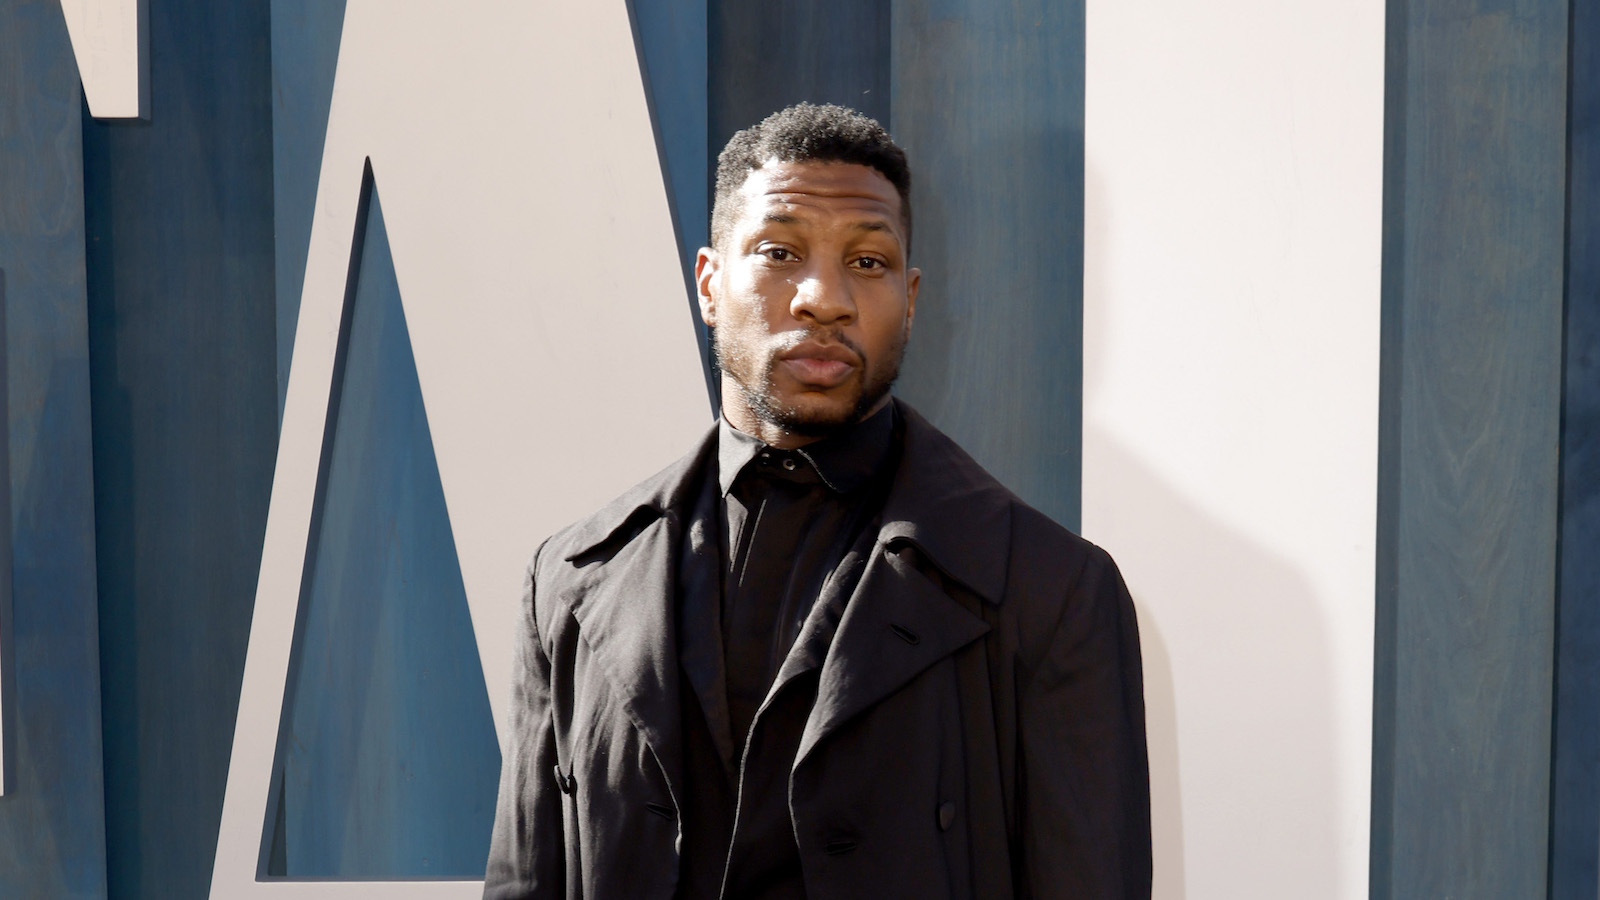 How do you think Jonathan Majors will do as Kang the Conqueror? : r/Marvel